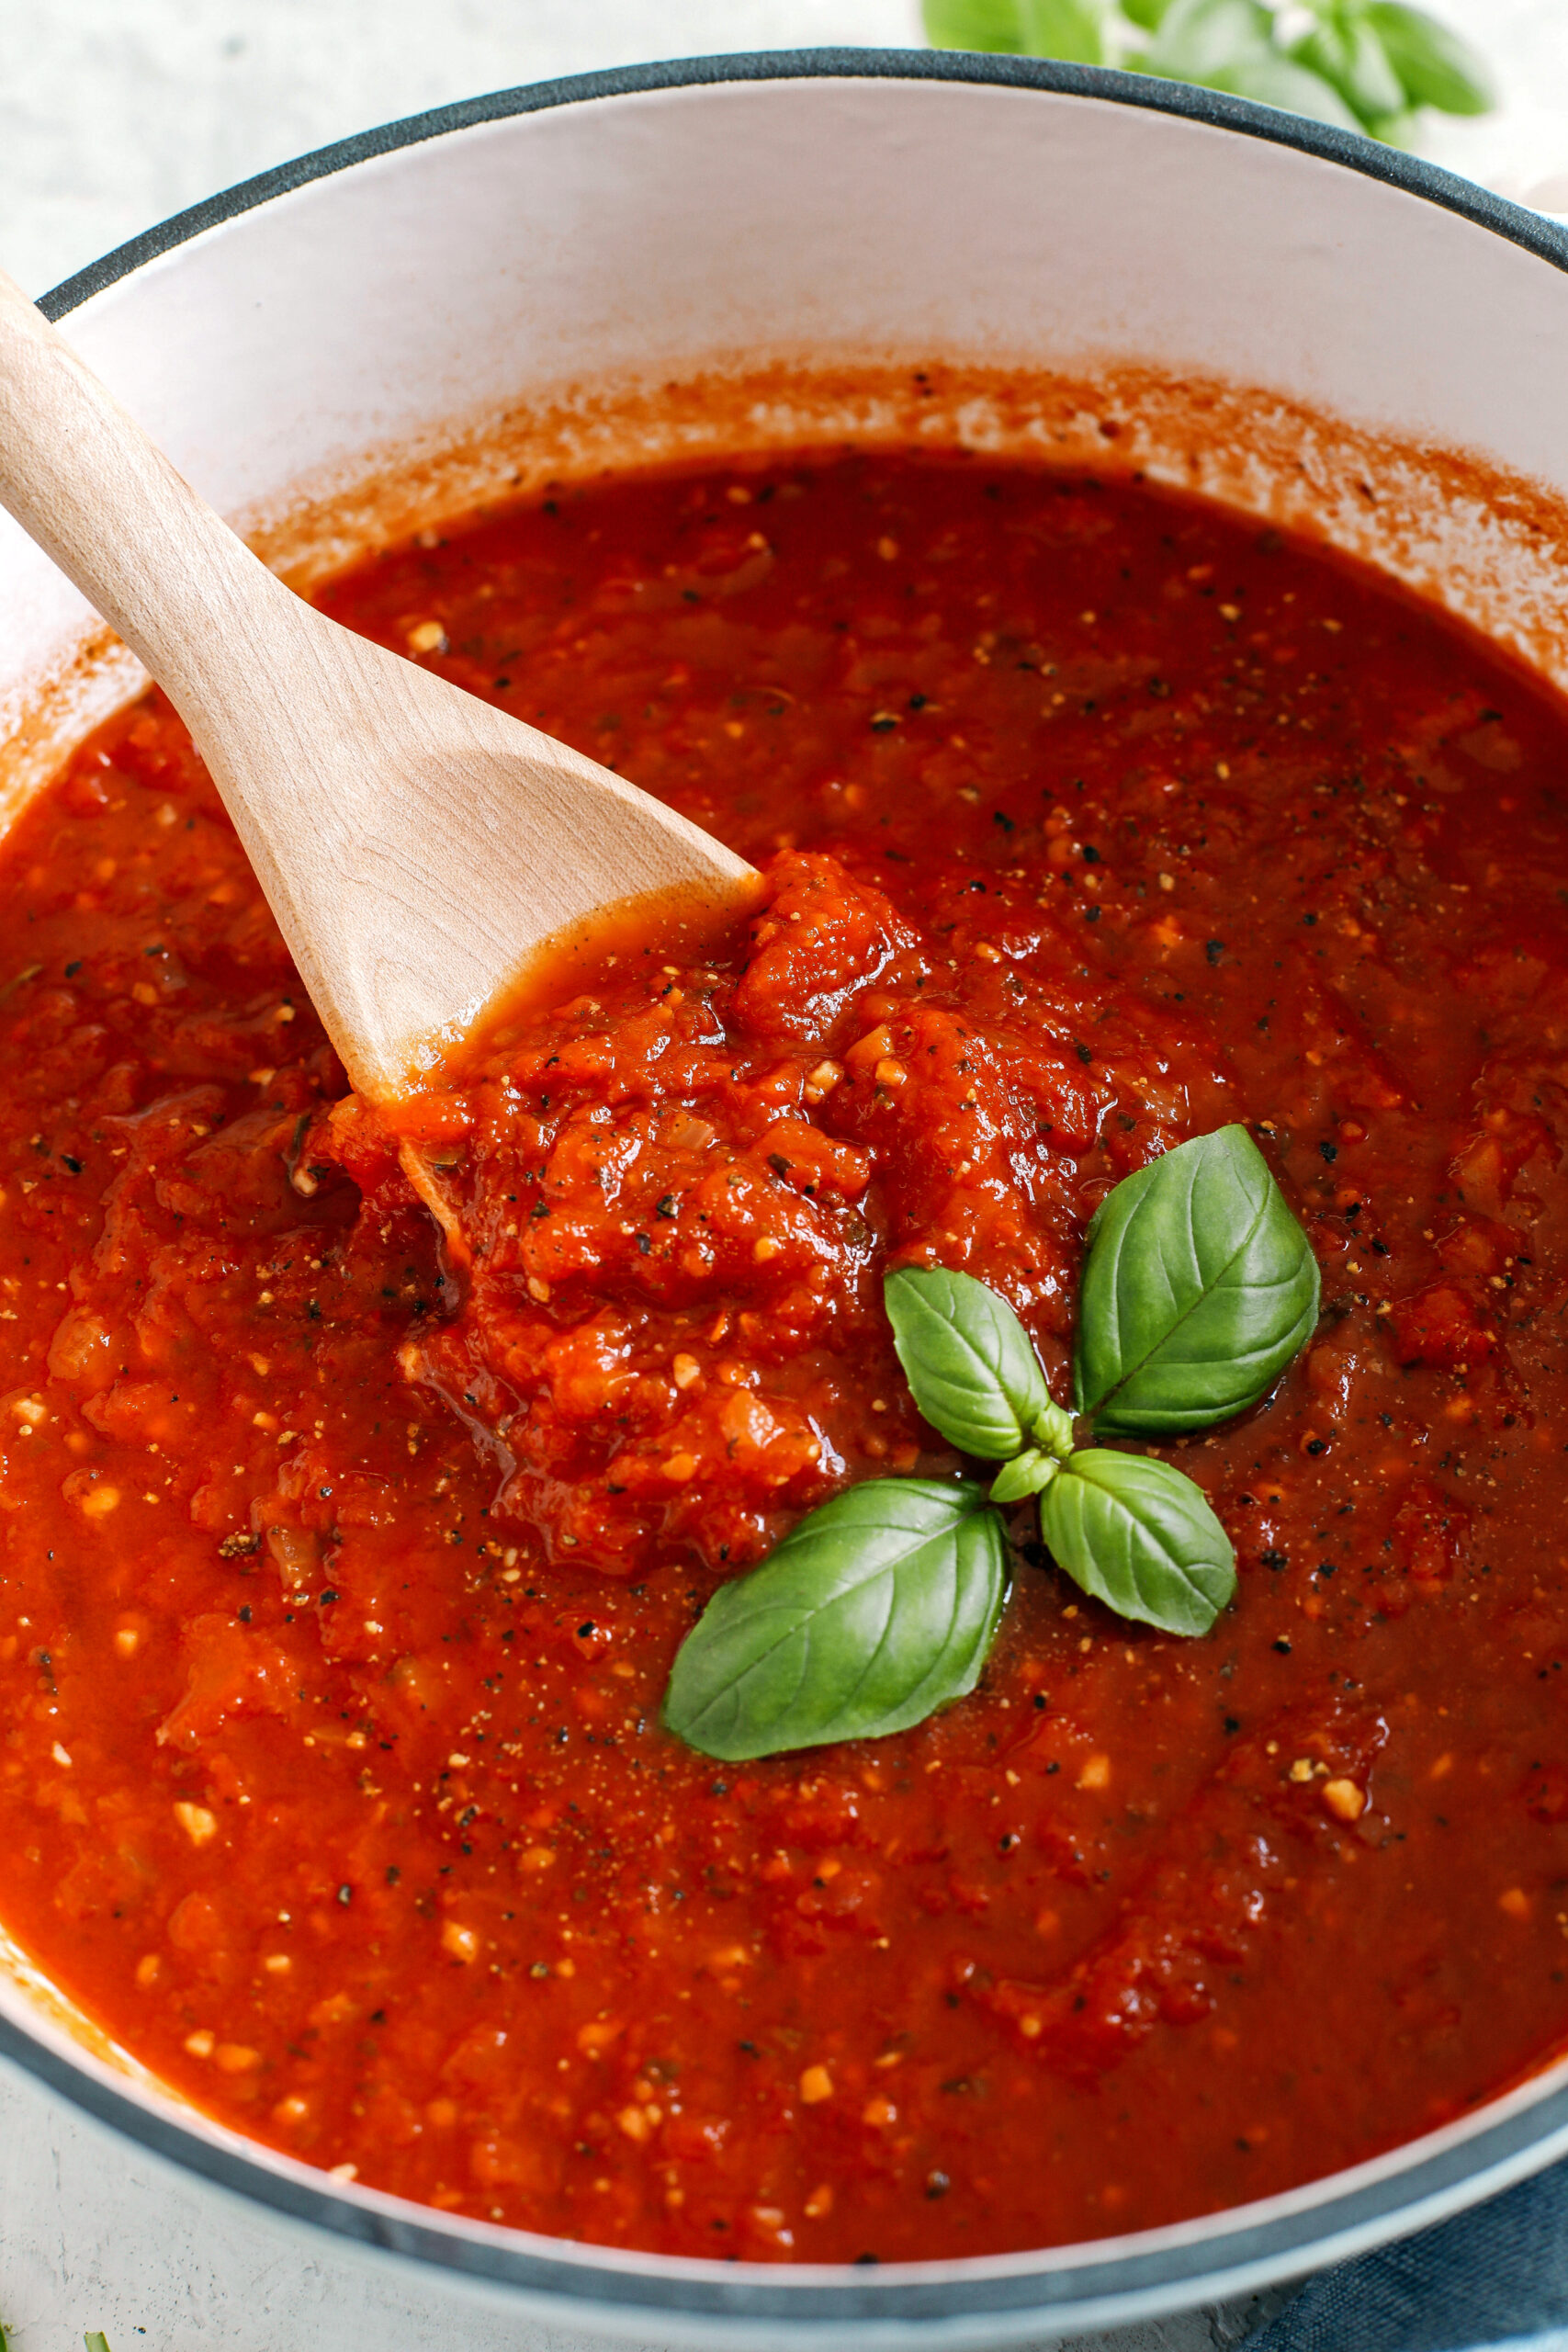 The most delicious homemade Simple Marinara Sauce made with San Marzano tomatoes, garlic, shallots and herbs. This is a family favorite and one I KNOW you’ll make time and time again!